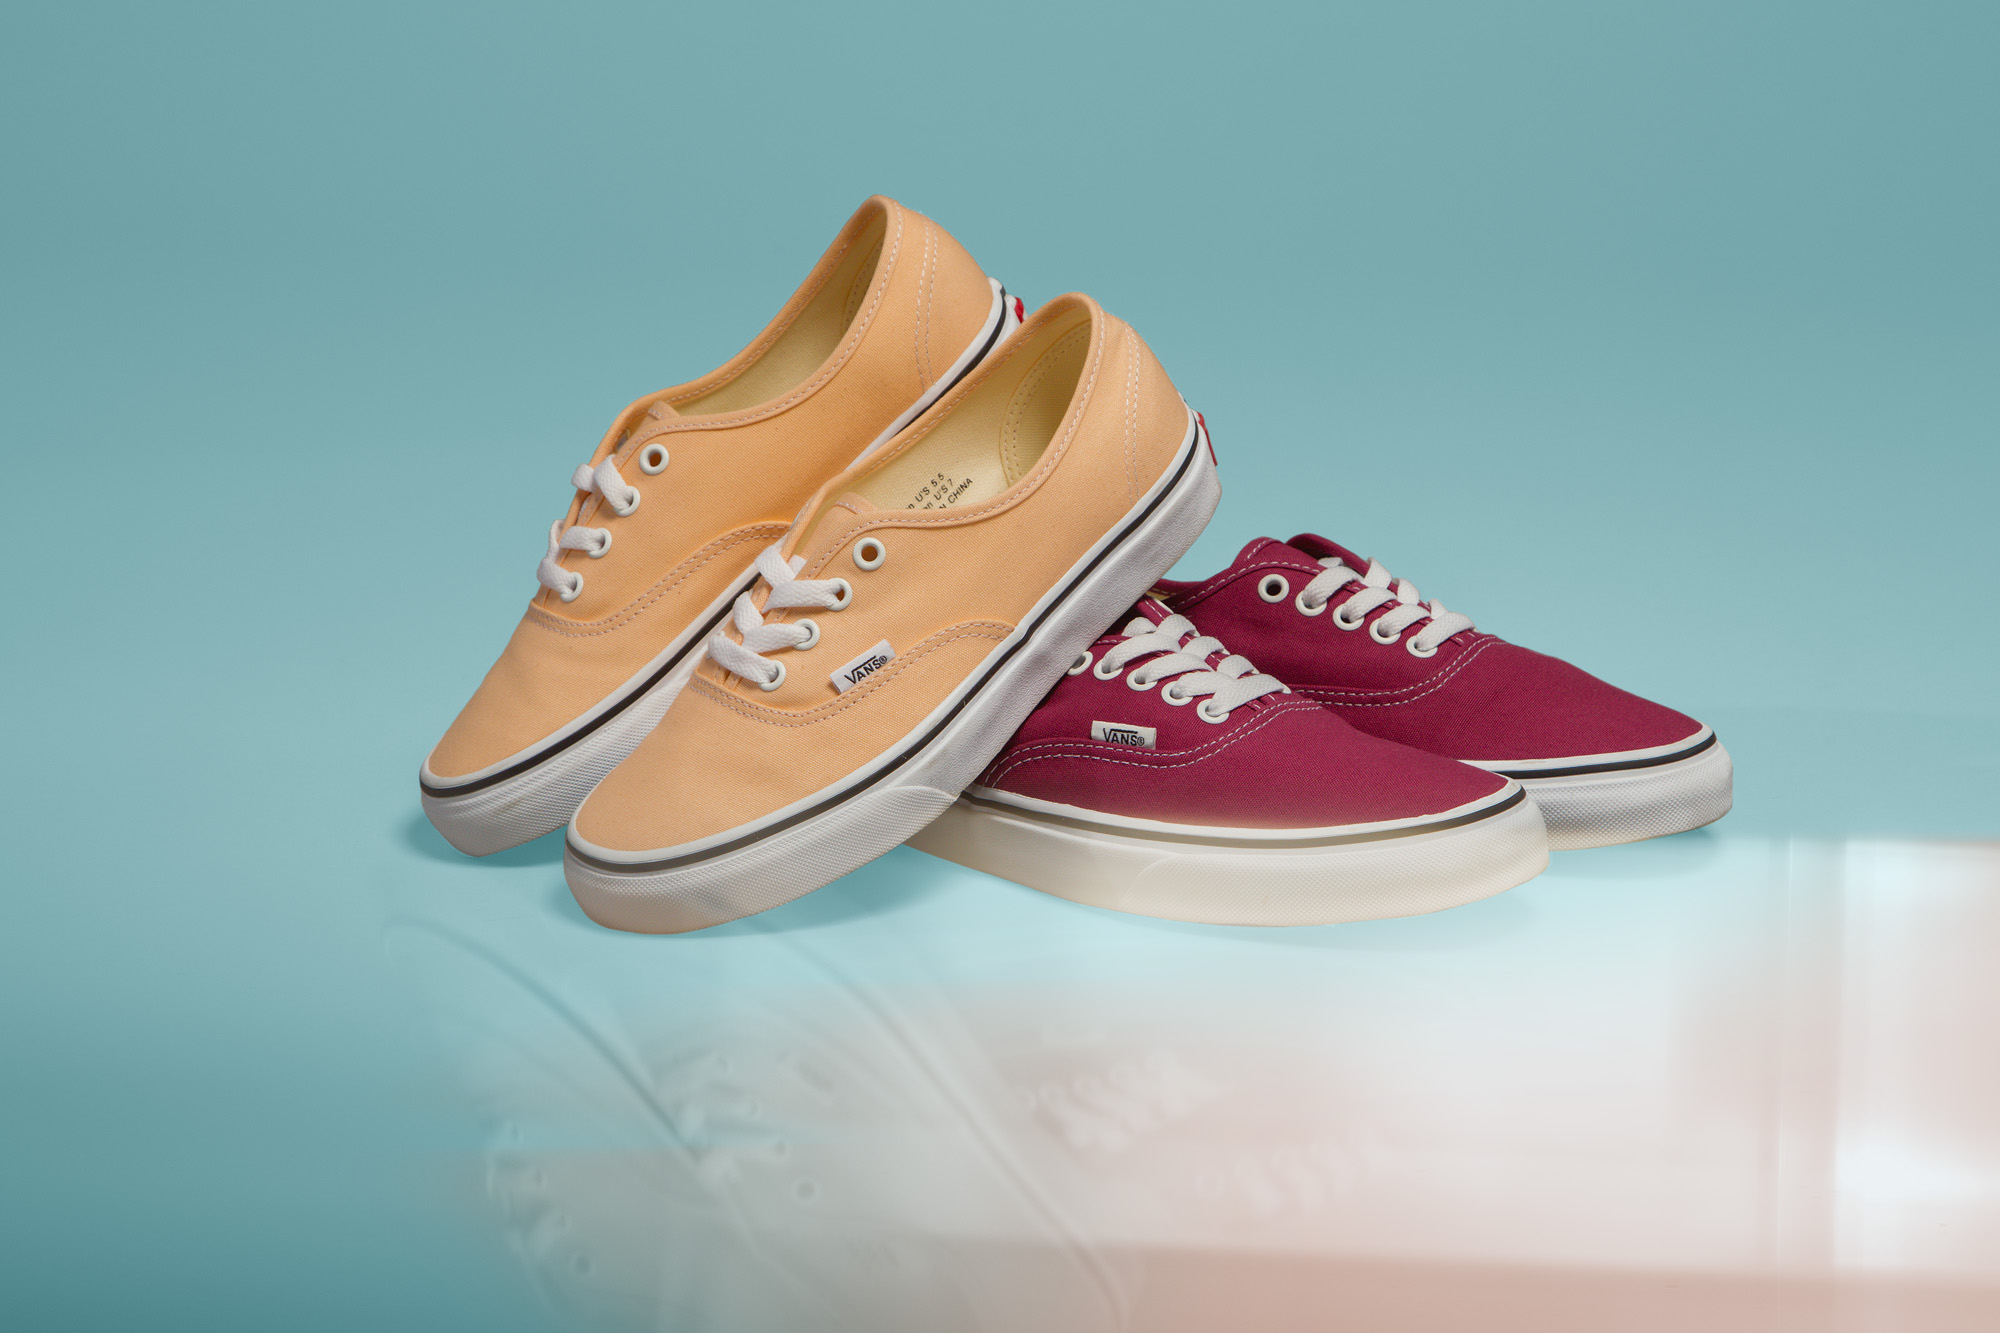 vans color theory collection